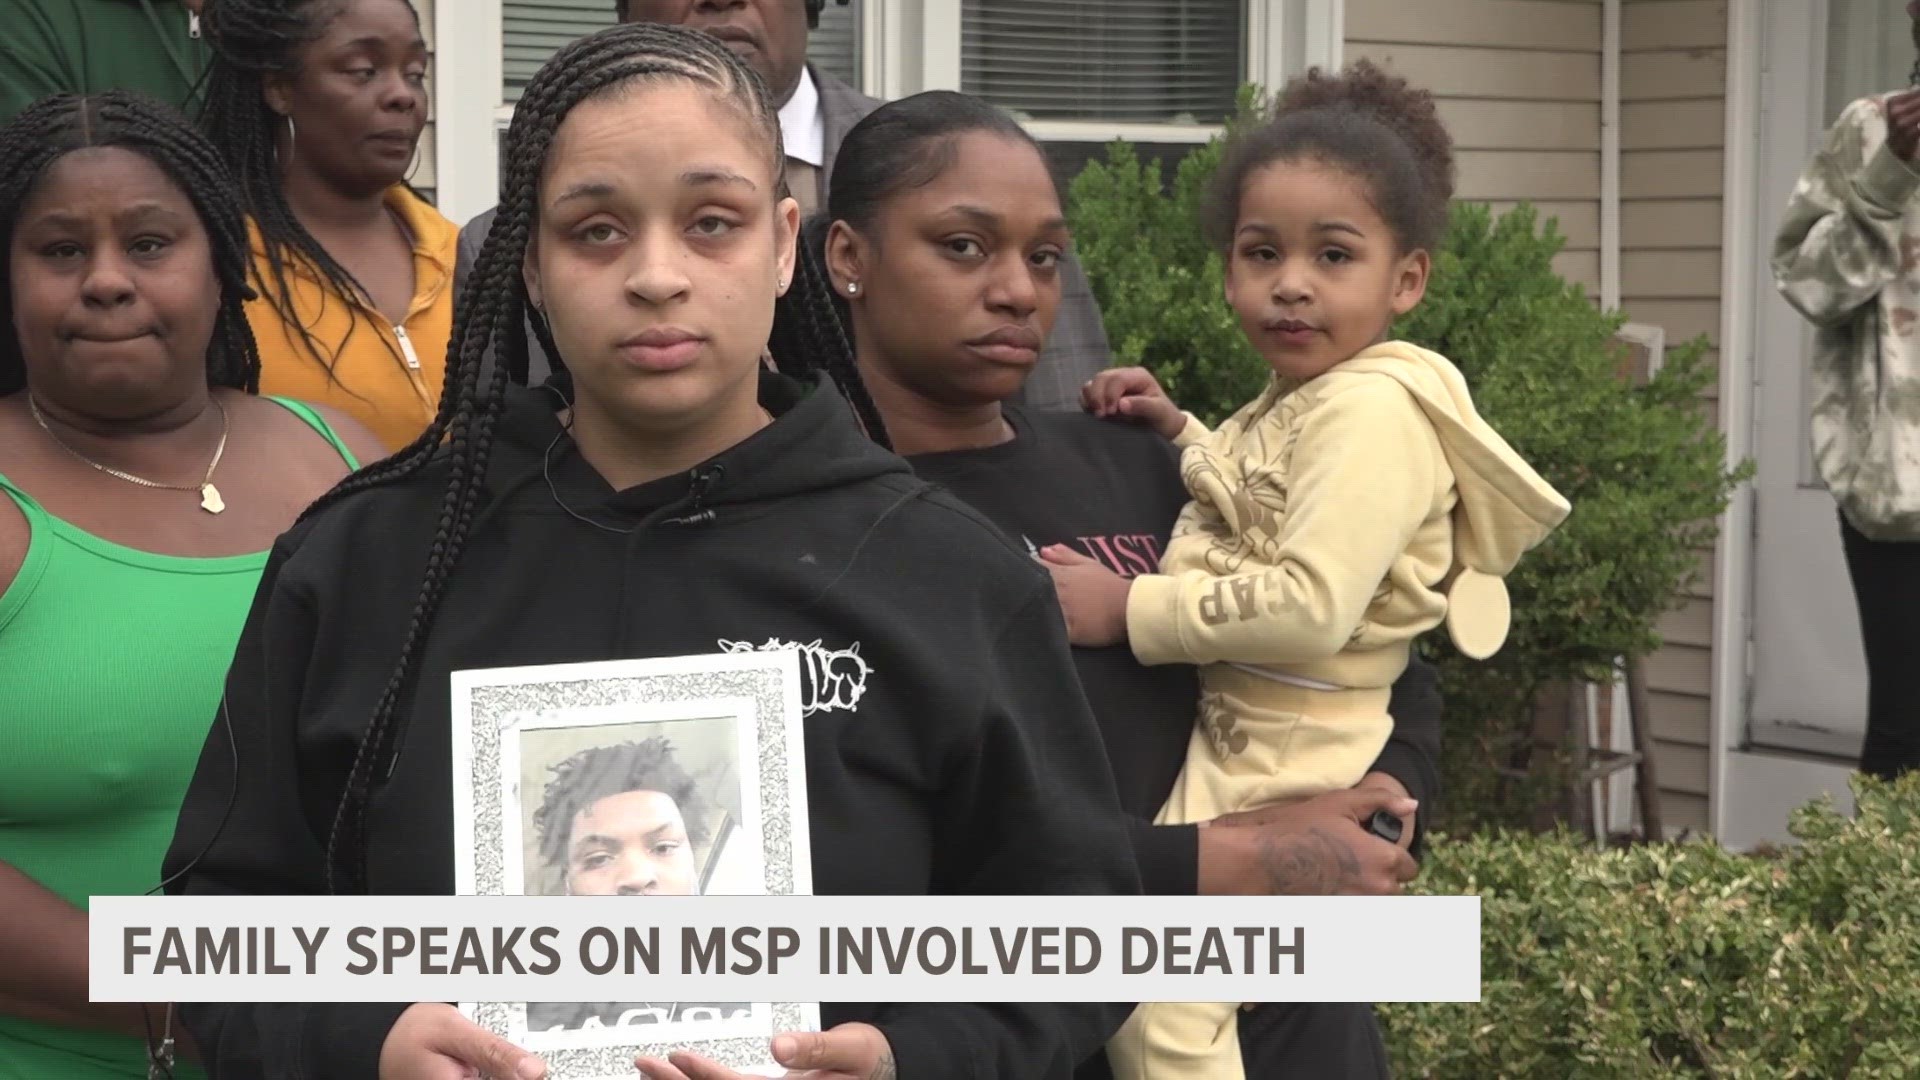 The family is seeking justice, MSP said the officer has been placed on leave.